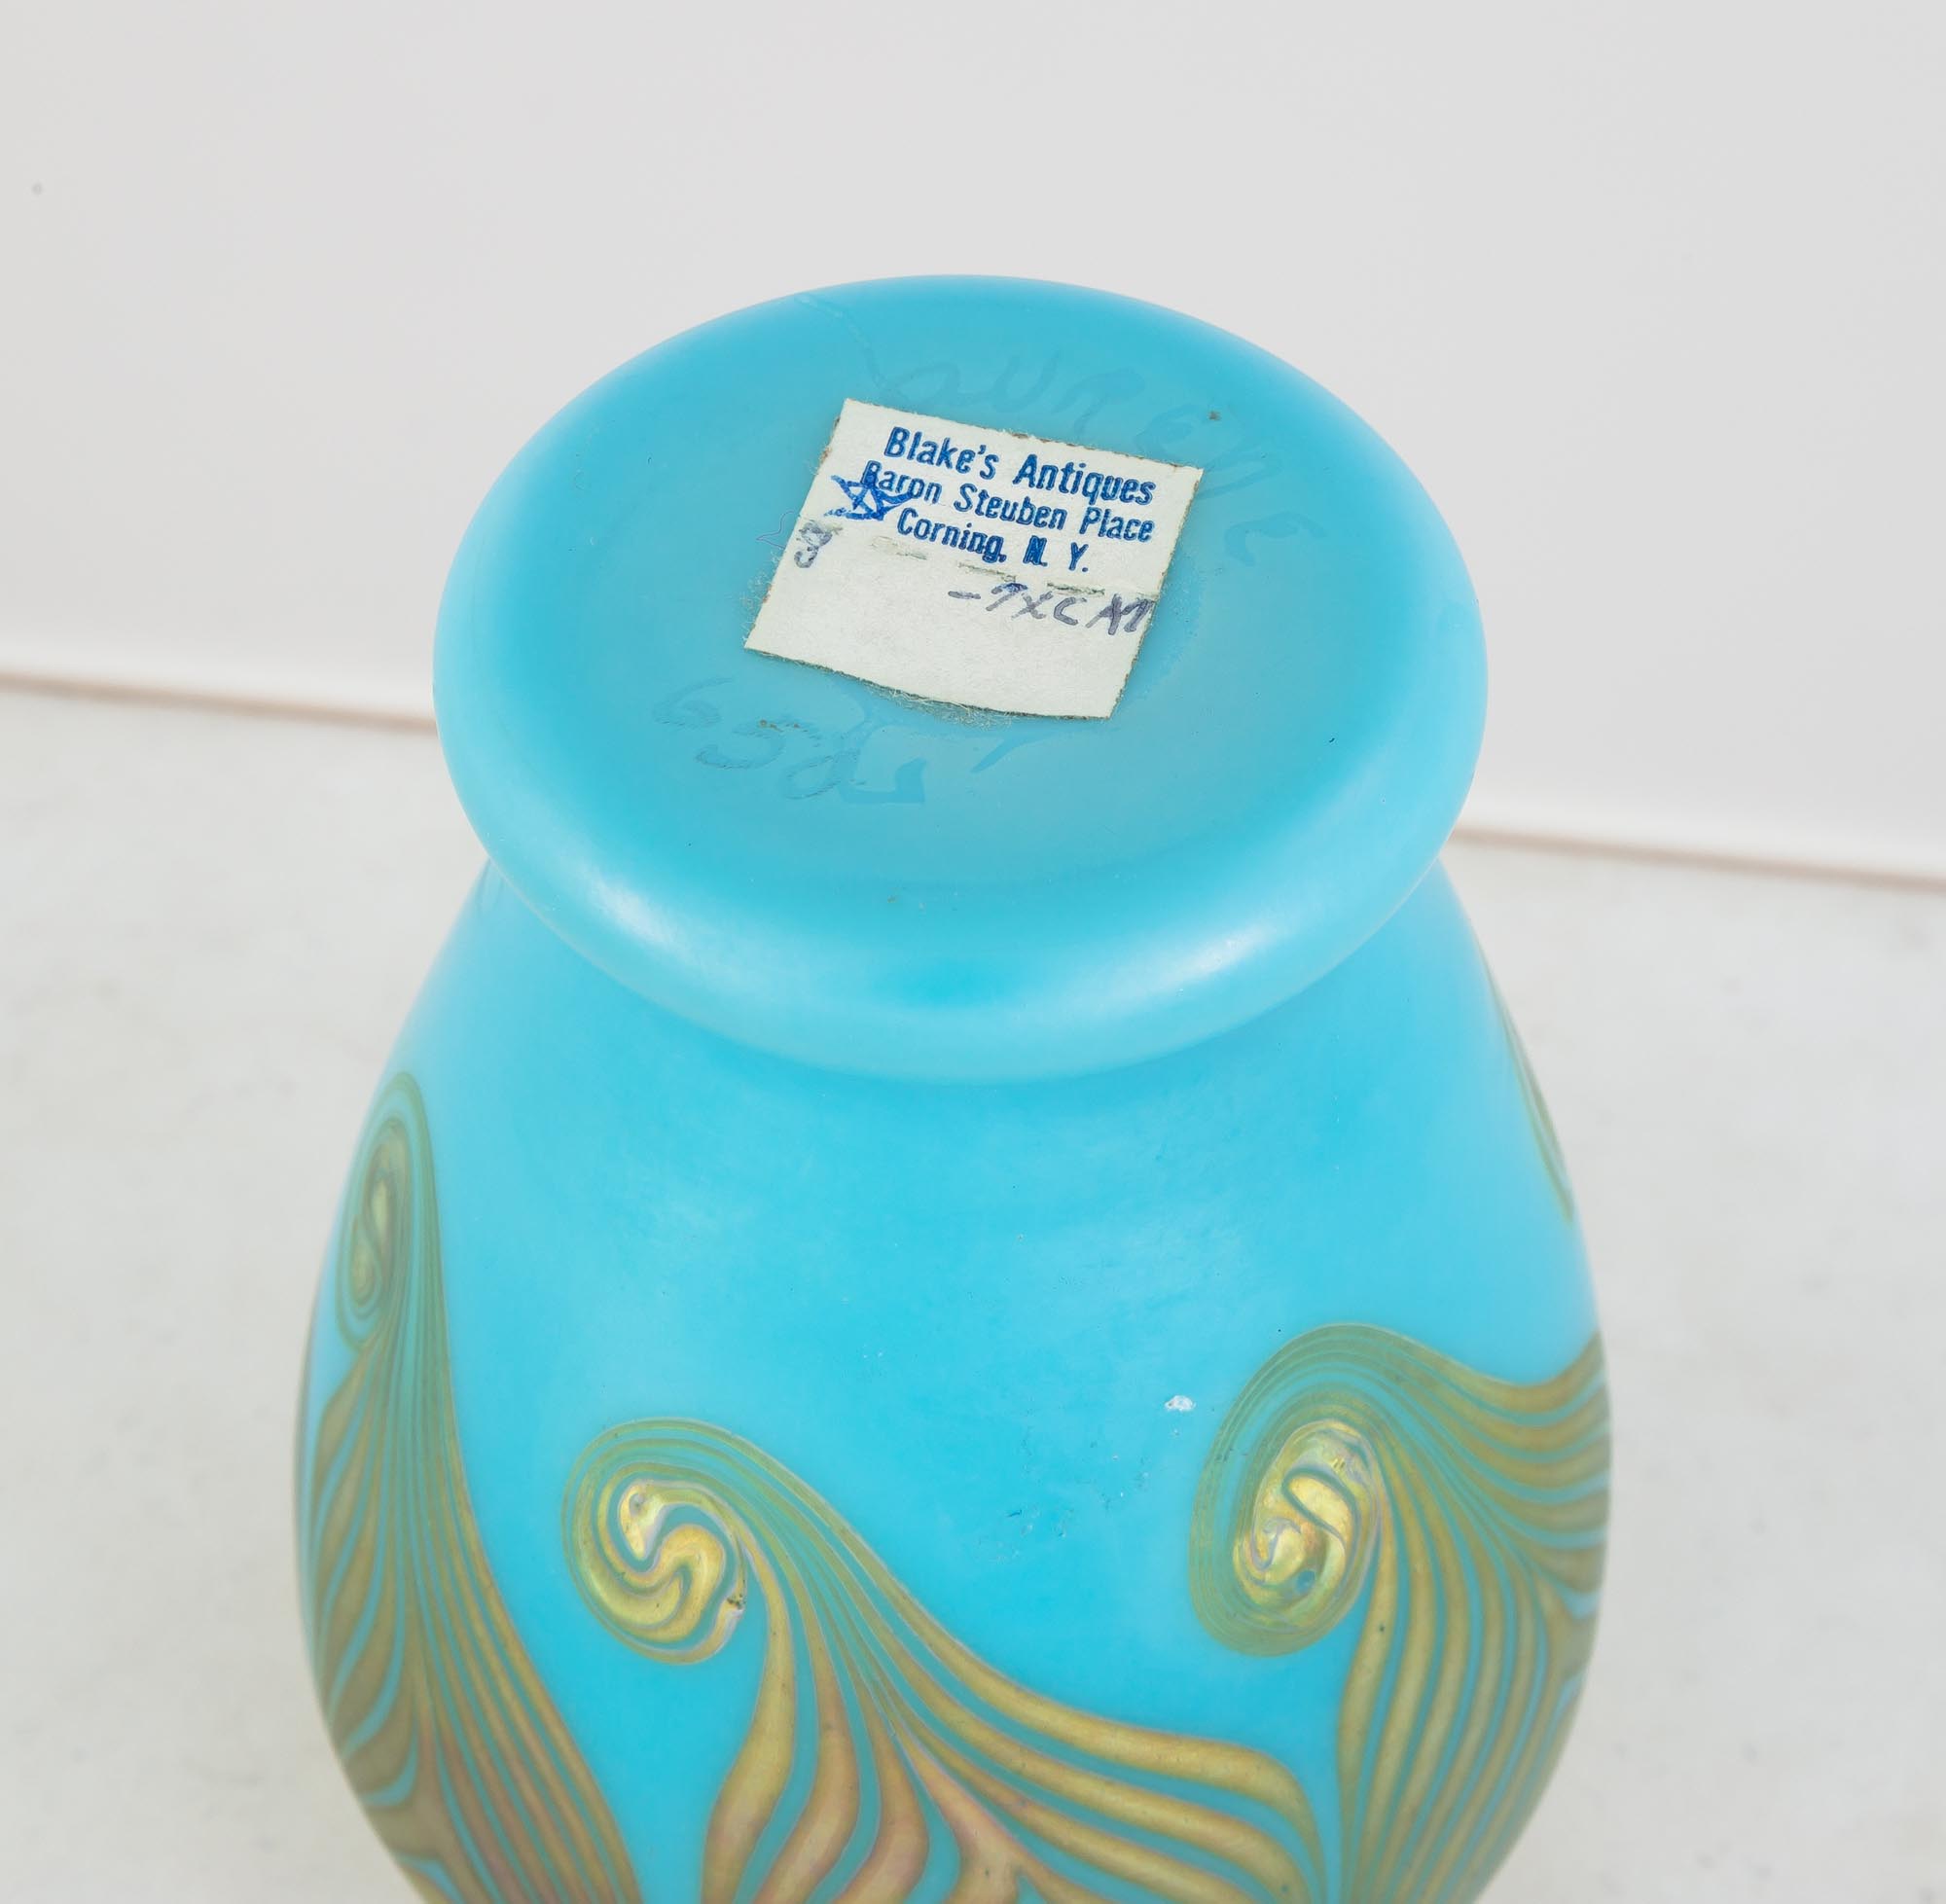 Steuben Decorated Vase. Early 20th century. Signed Aurene 650. Excellent. Ht. 4 1/2" Dia 3". The - Image 2 of 2